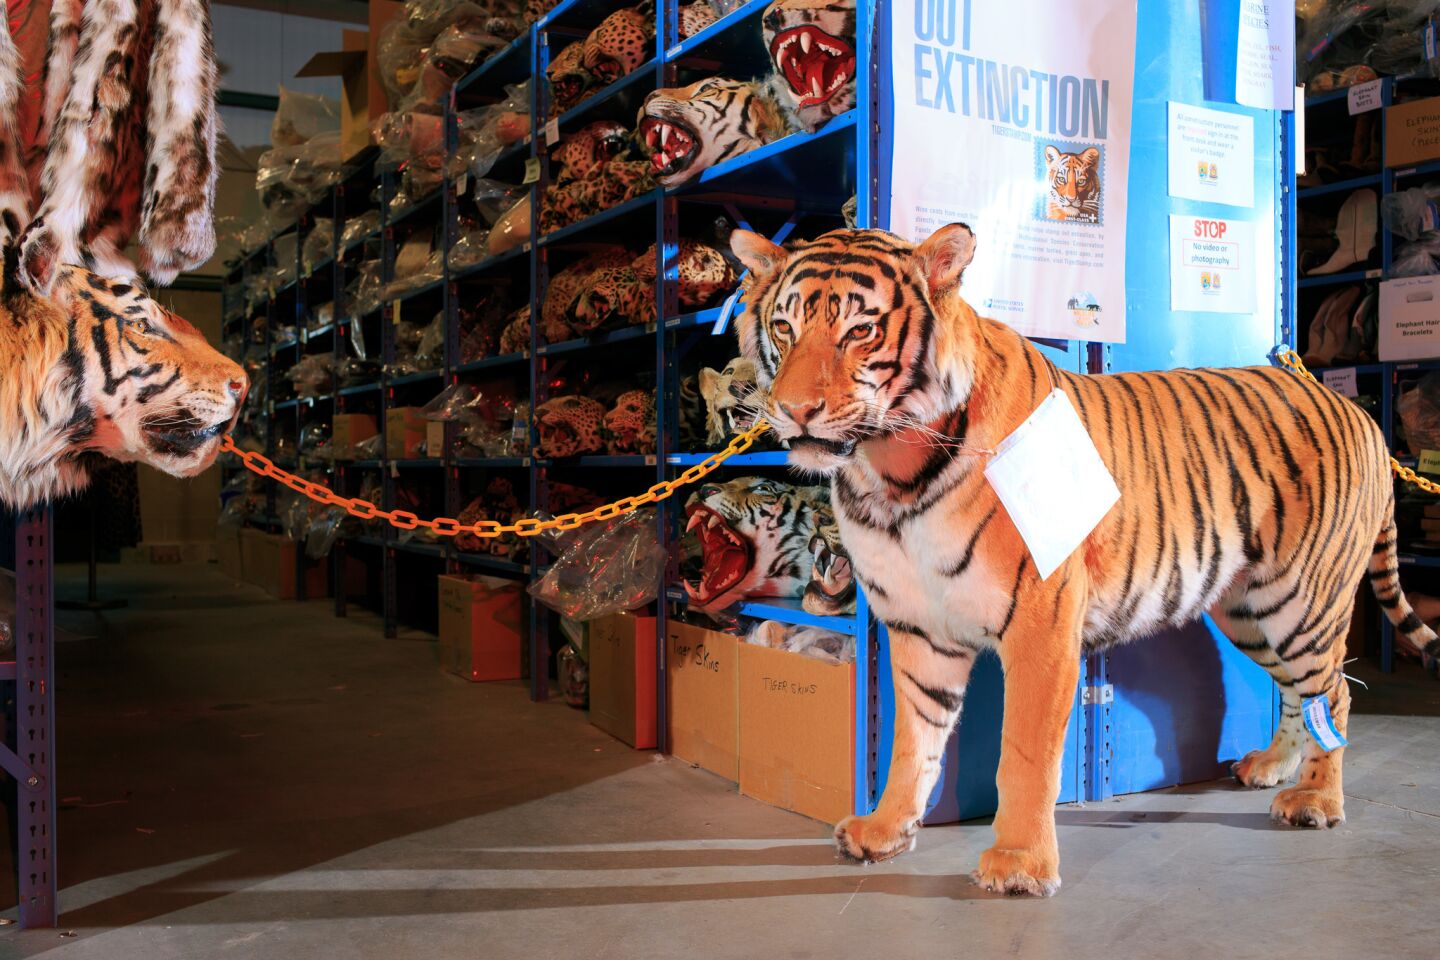 Mounted Tigers stand at the end of an aisle full of various "cats" inside the U.S. Fish and Wildlife Service National Wildlife Property Repository.